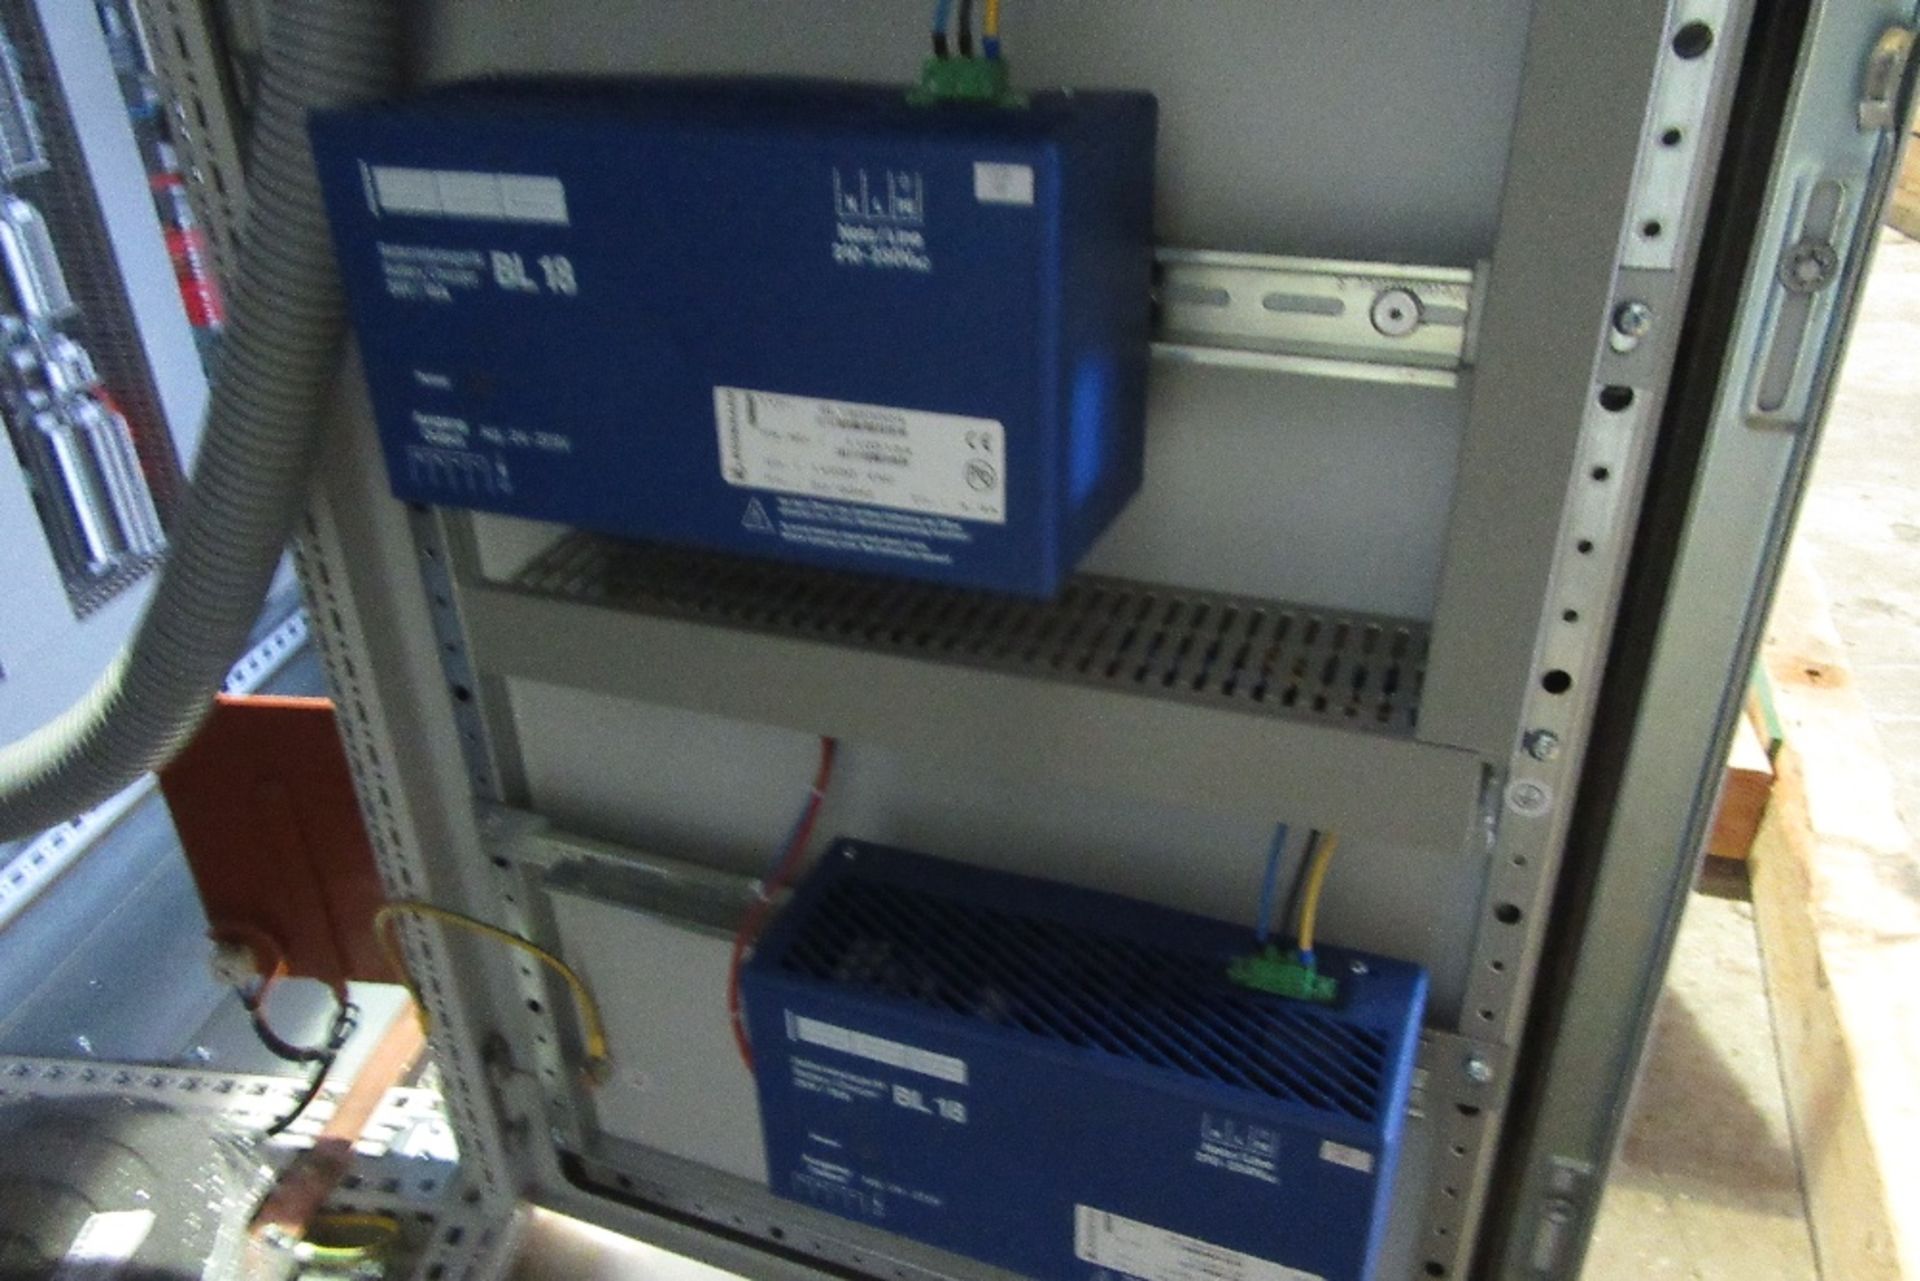 Woodward Power Solutions Station Transformer / Utility Feed Control Cabinet inc: Prometer KVAR Meter - Image 27 of 27